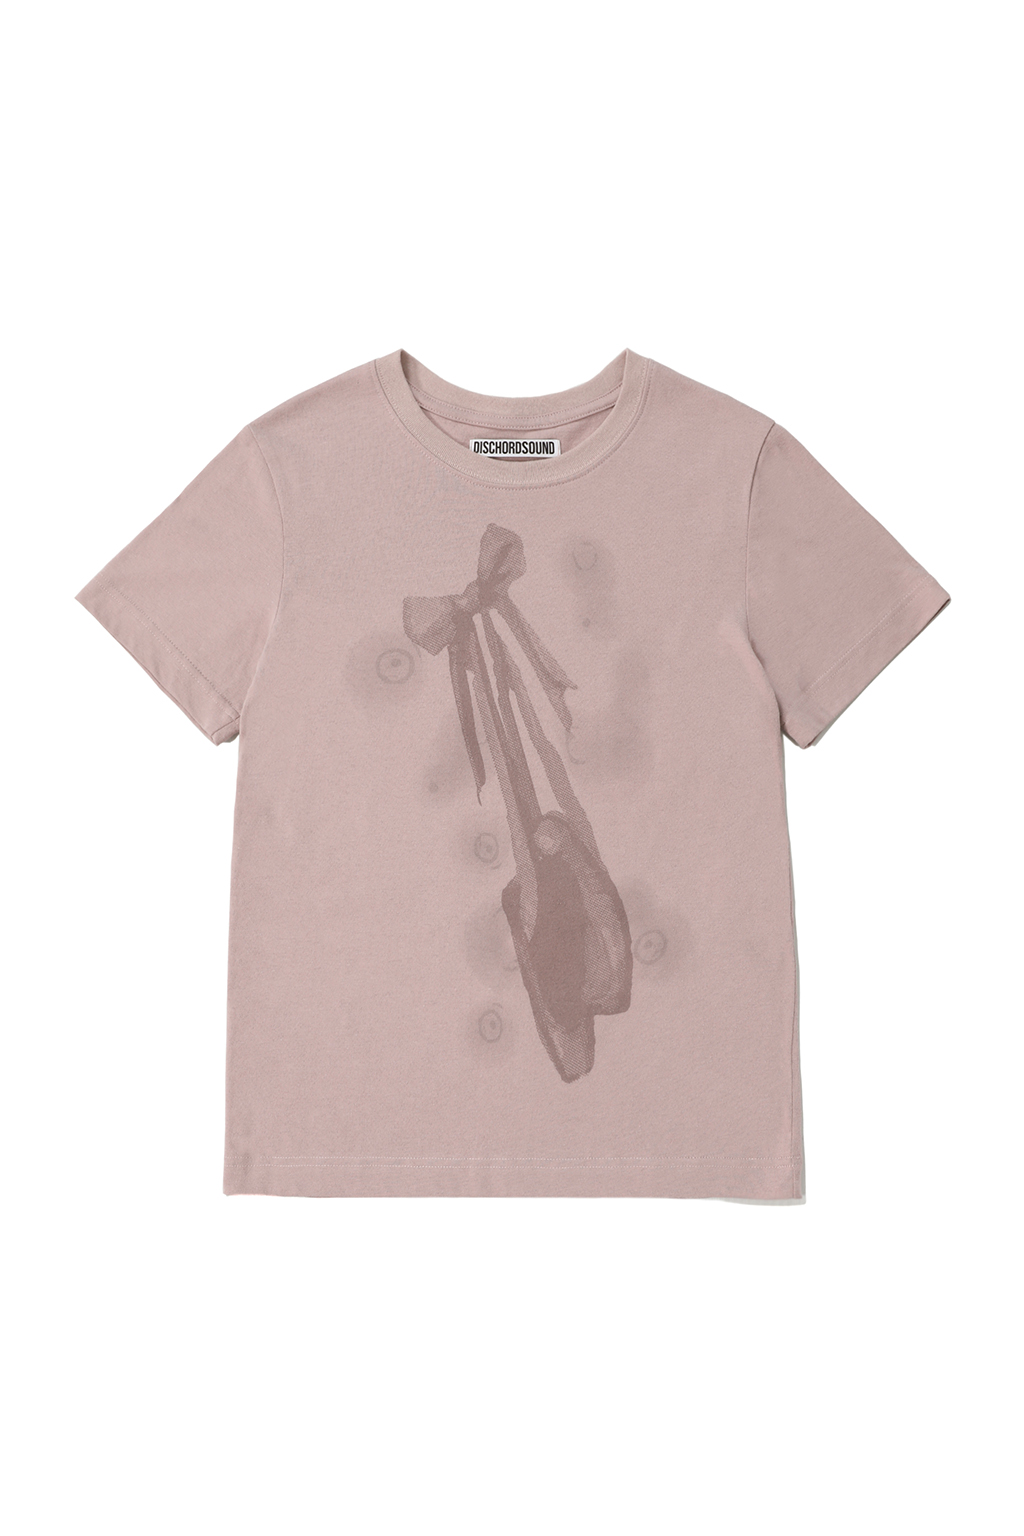 BALLET SHOES TEE [PINK]